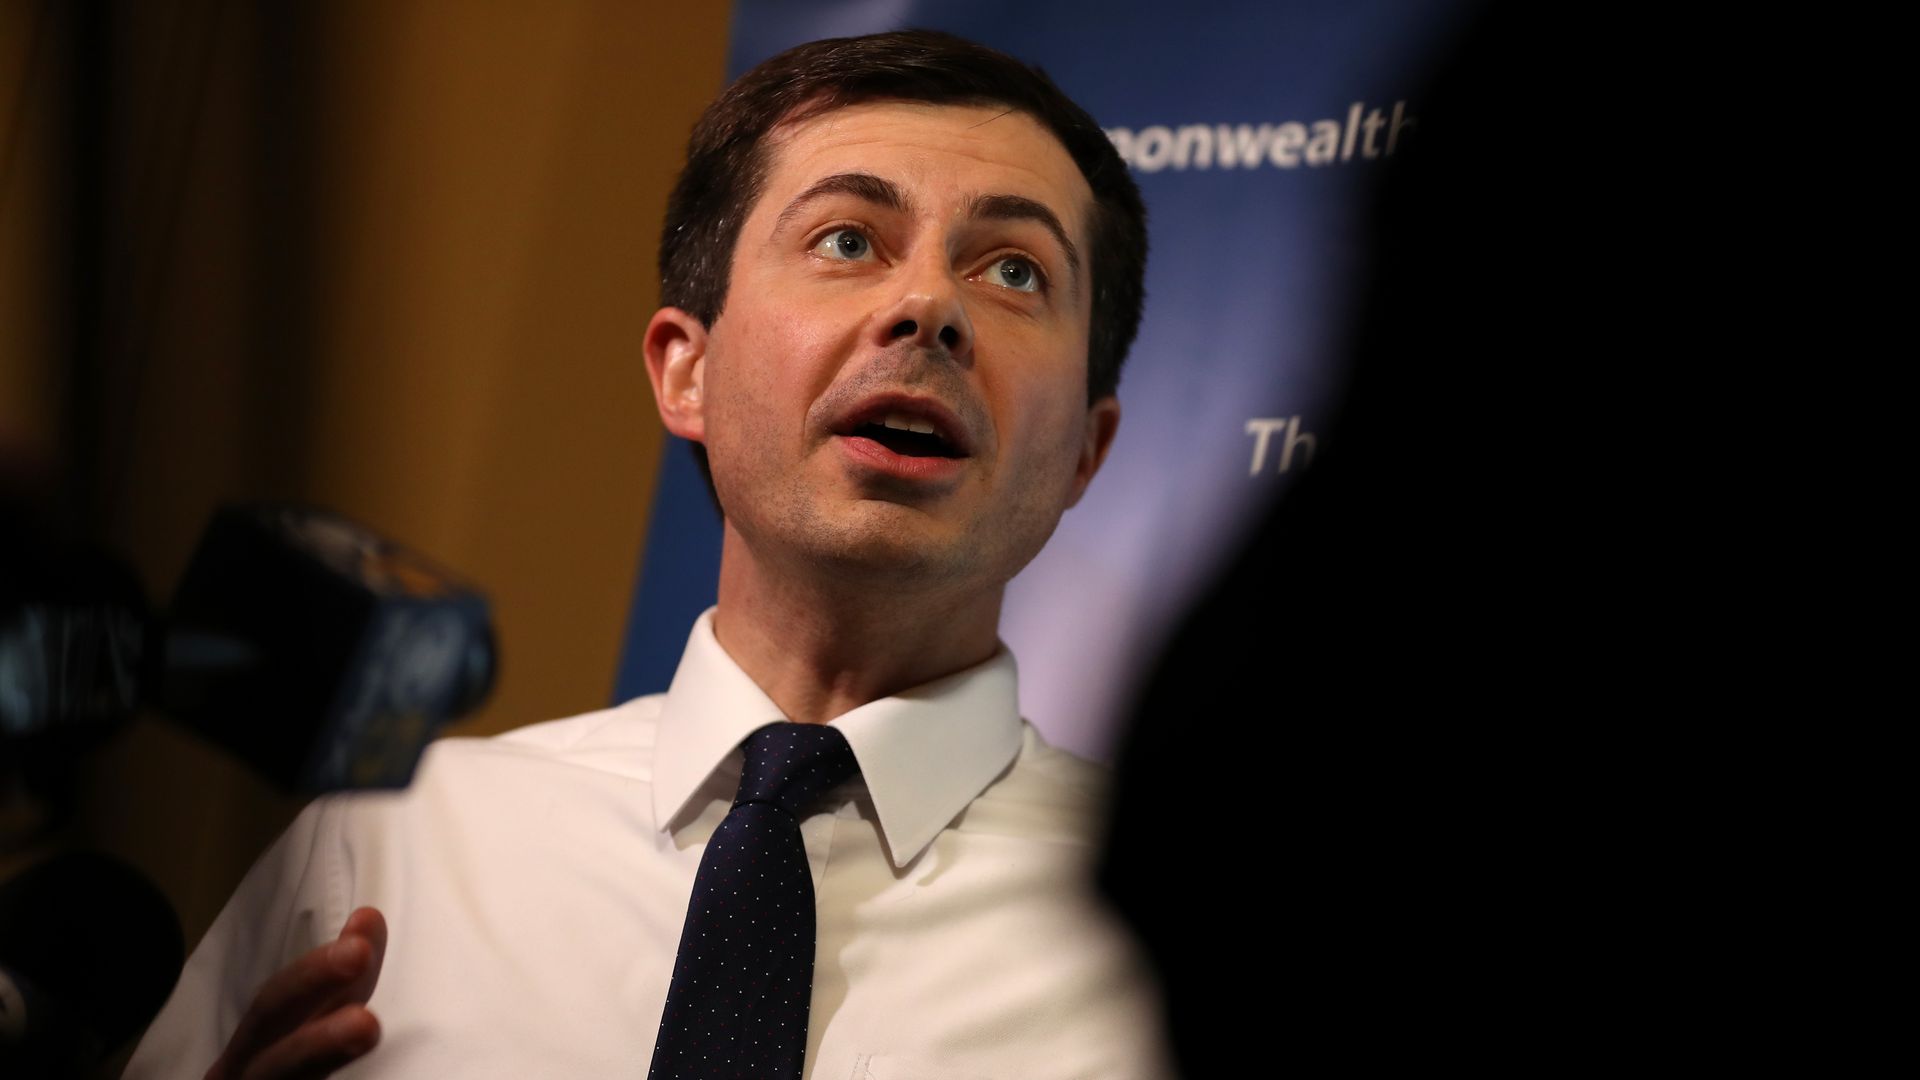 Mayor Pete Buttigieg talking, with a partial shadow in front of him. He's a potential 2020 presidential election candidate.